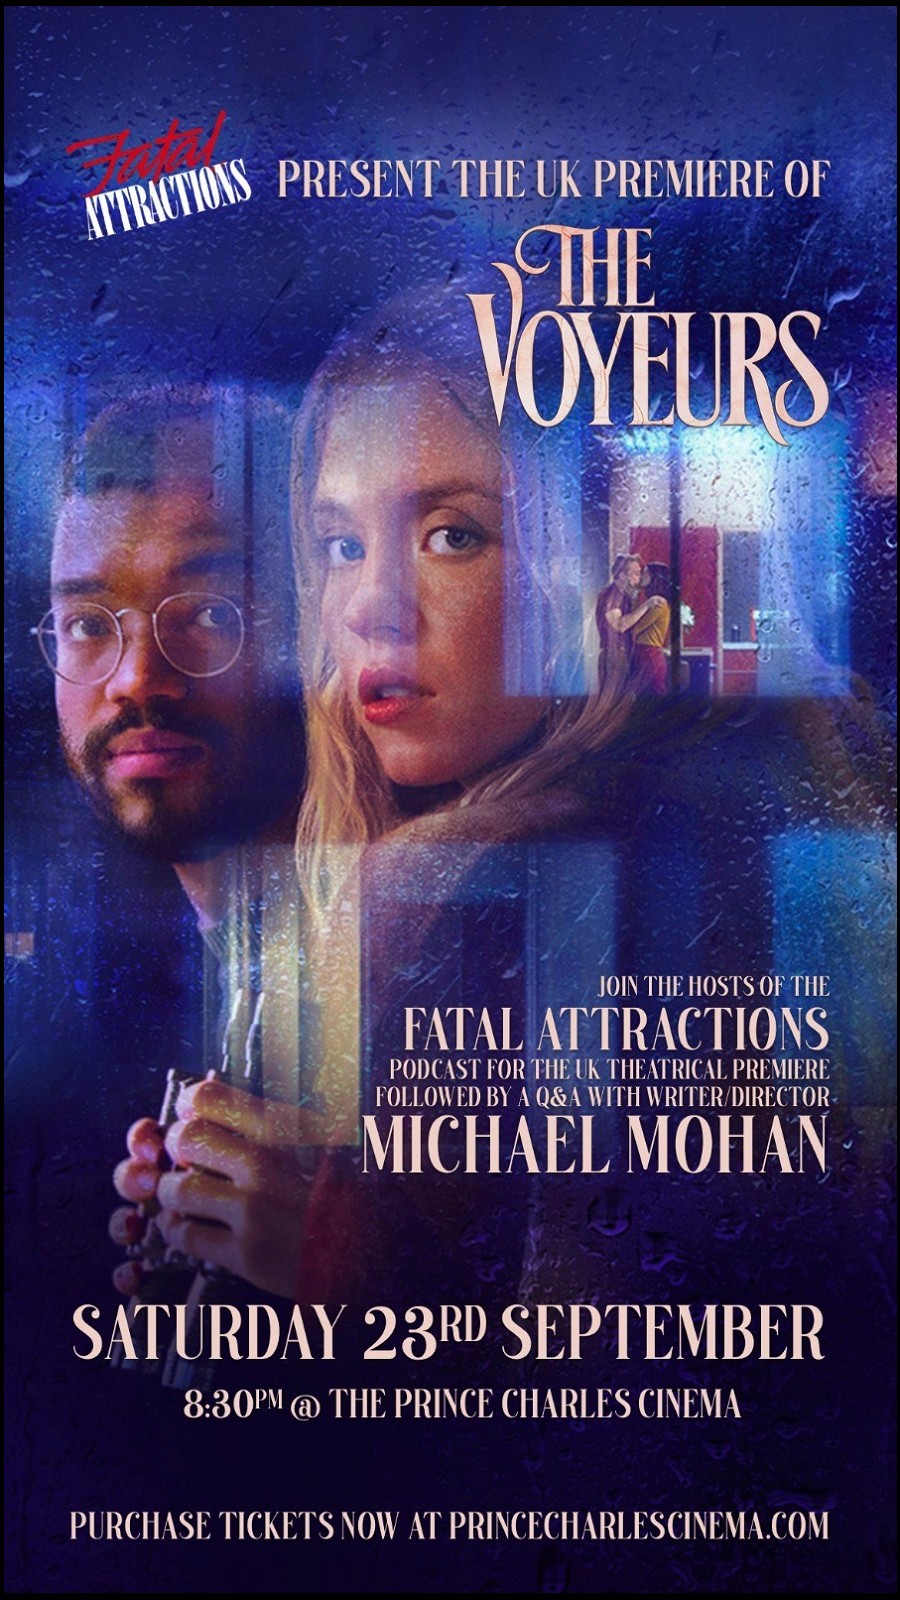 THE VOYERS presented by the FATAL ATTRACTIONS PODCAST